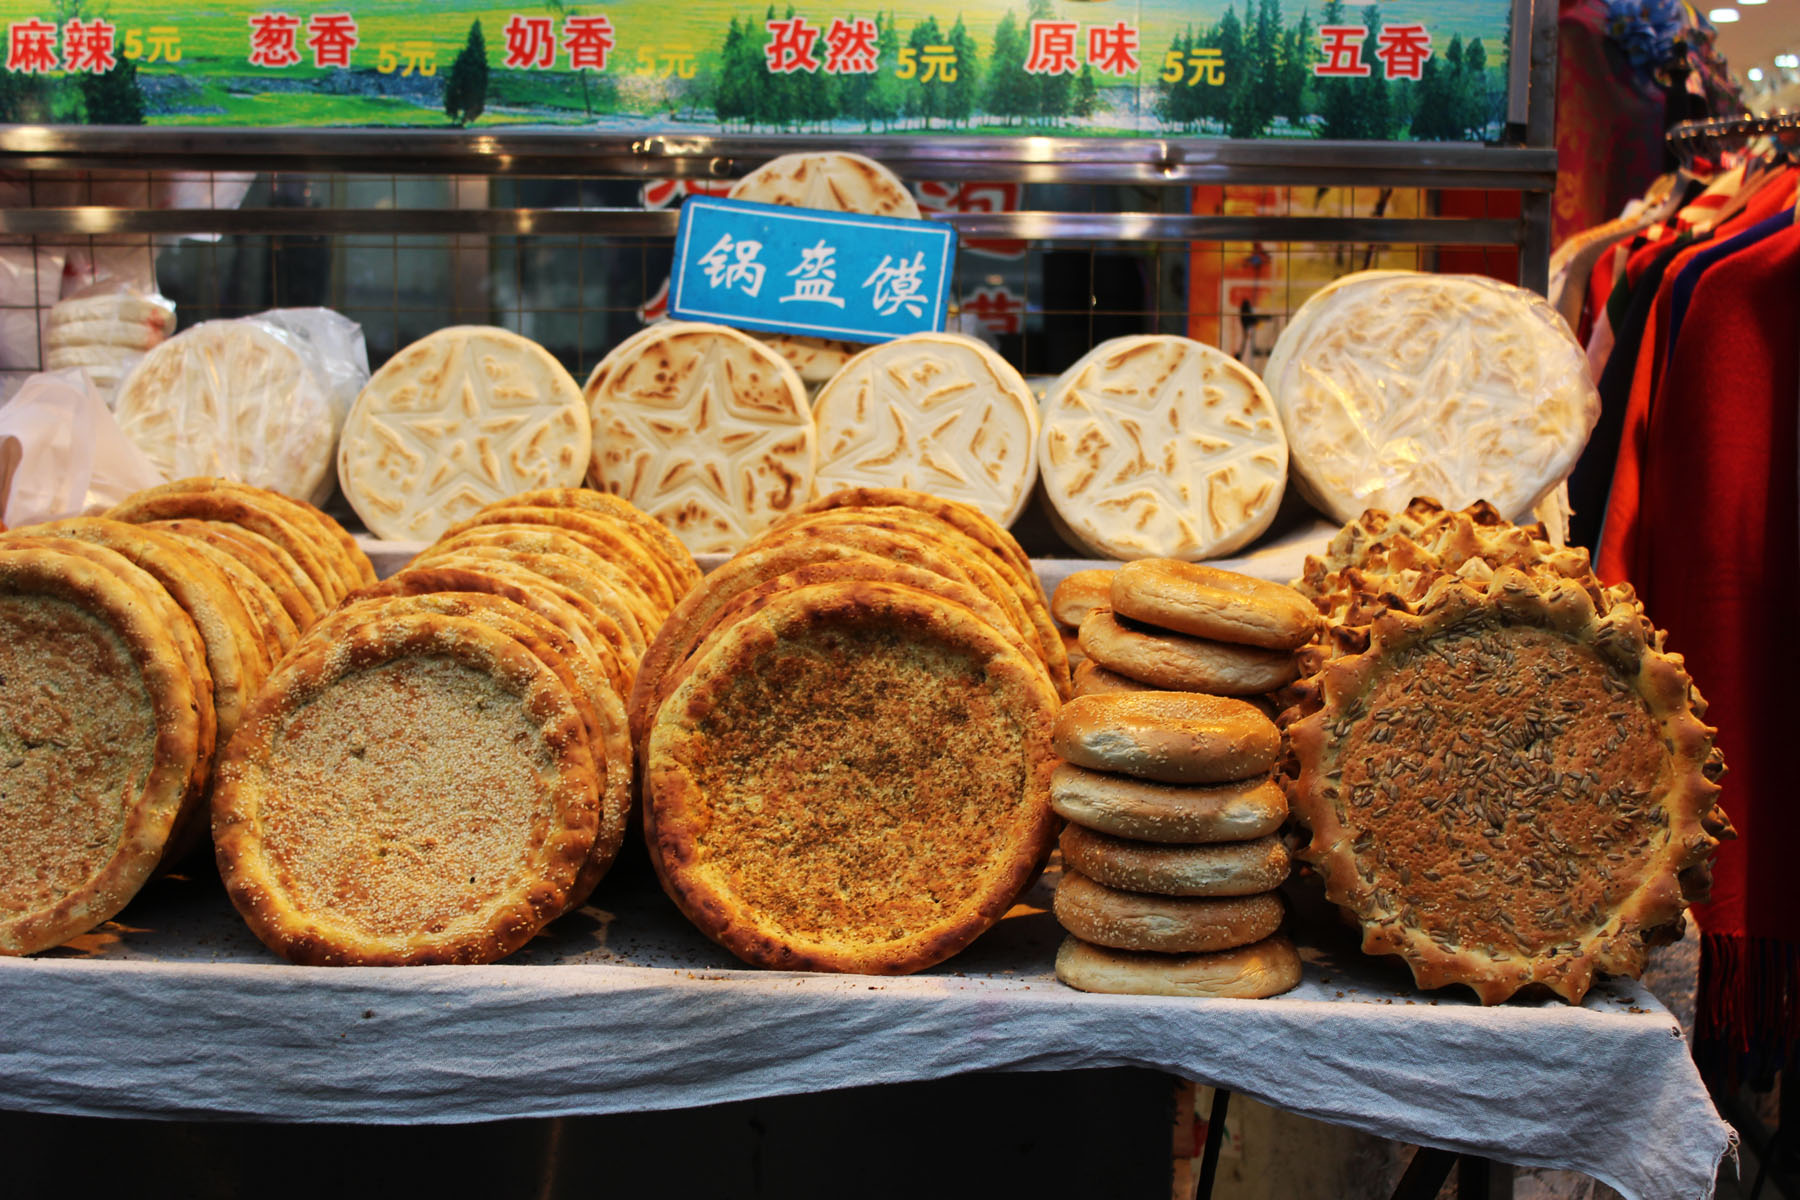 Finding vegetarian food in China might be easier than you think. Find out my top tips on the blog!